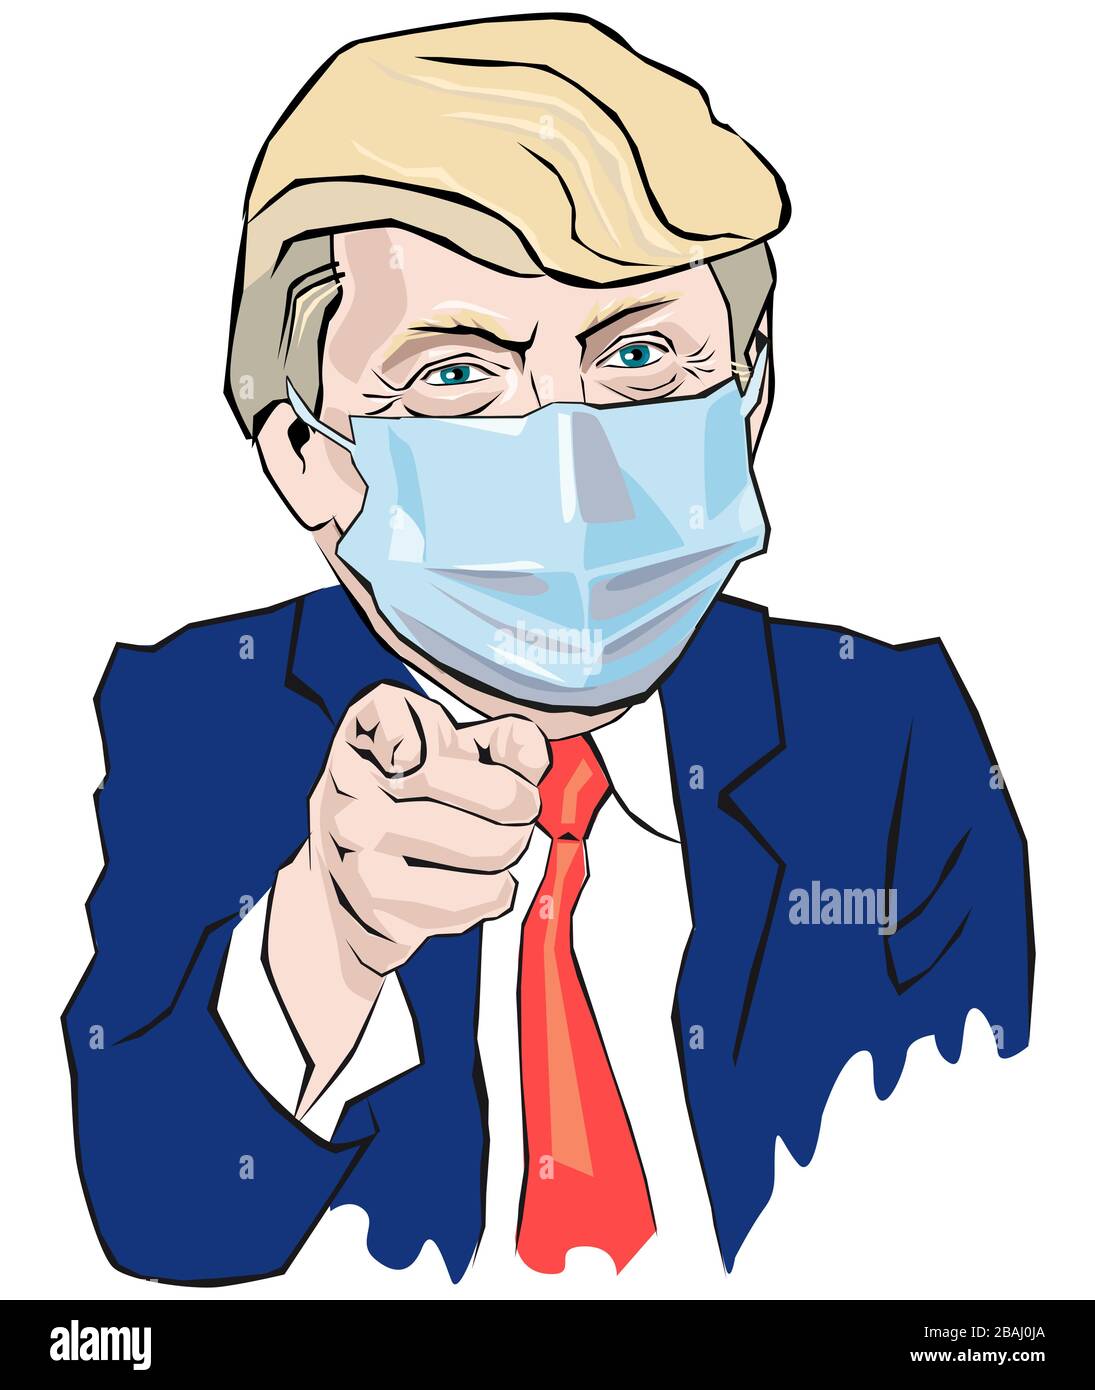 Cartoon Portrait Of President In Medical Mask Stock Vector Image Art Alamy Alamy is undoubtedly one of the largest online collections of stock photography in the world. https www alamy com cartoon portrait of president in medical mask image350749570 html